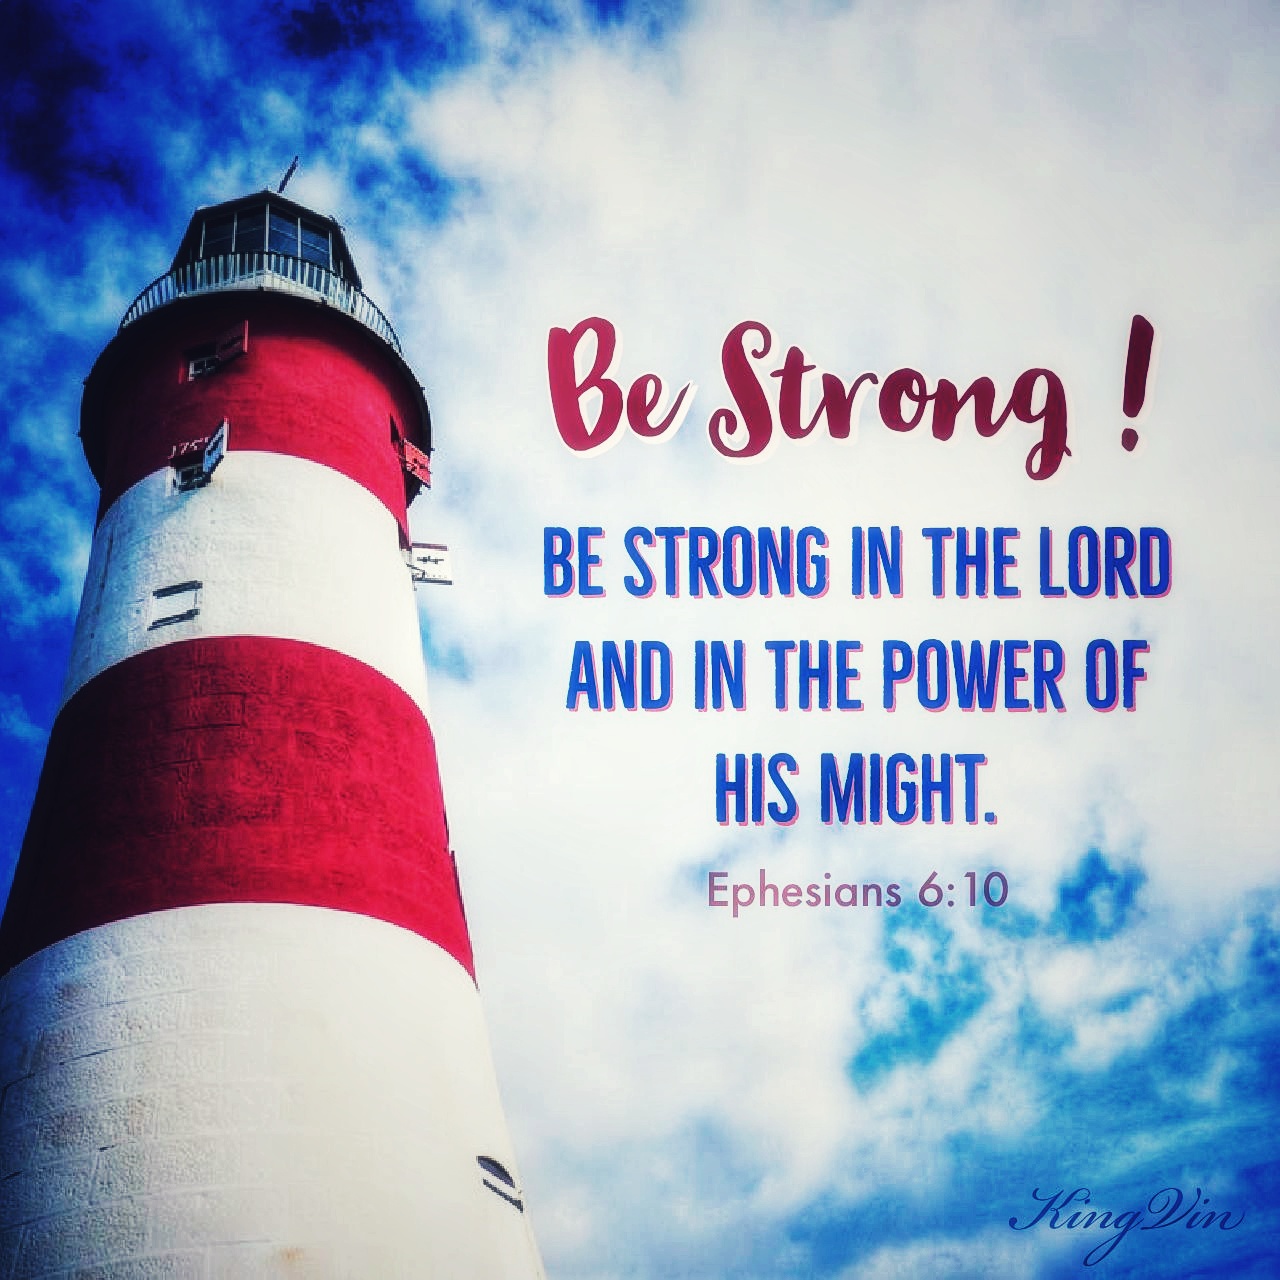 Finally, my brethren, be strong in the Lord and in the power of His might. Ephesians 6:10 NKJV